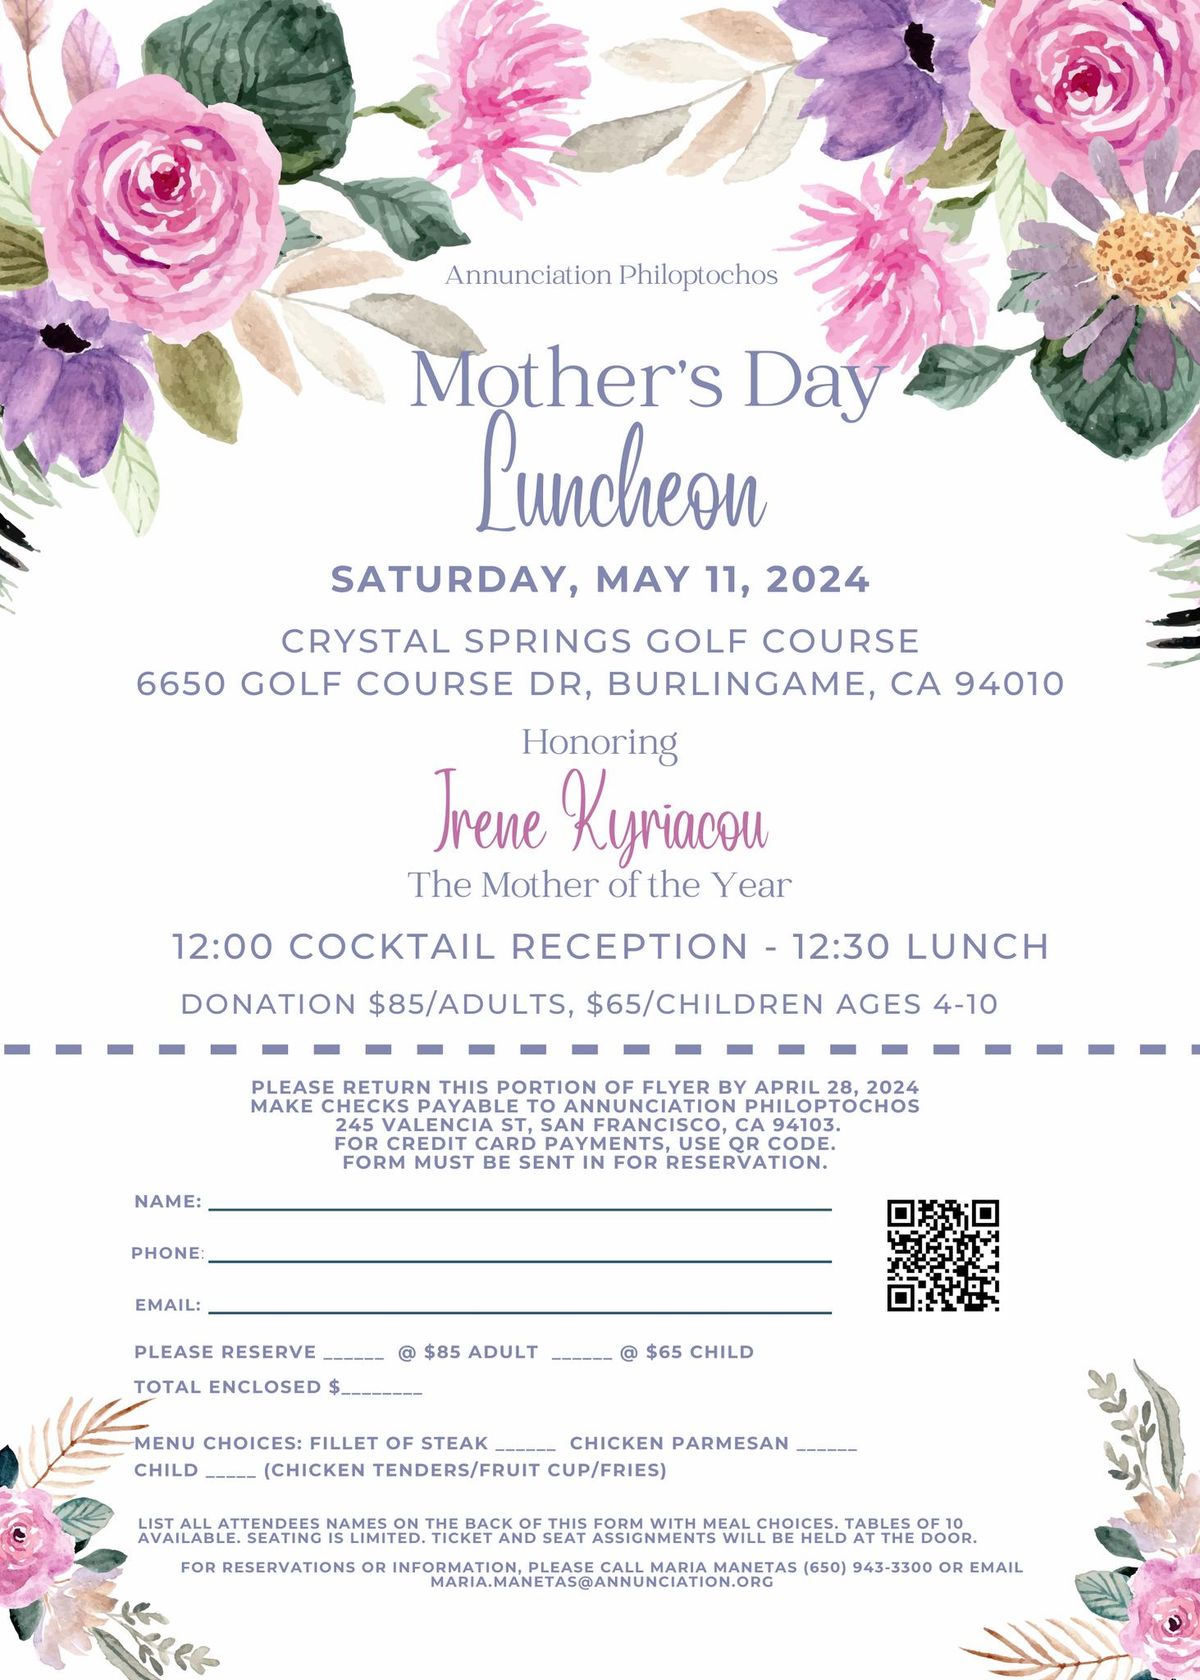 Annunciation Philoptochos Mother's Day Luncheon